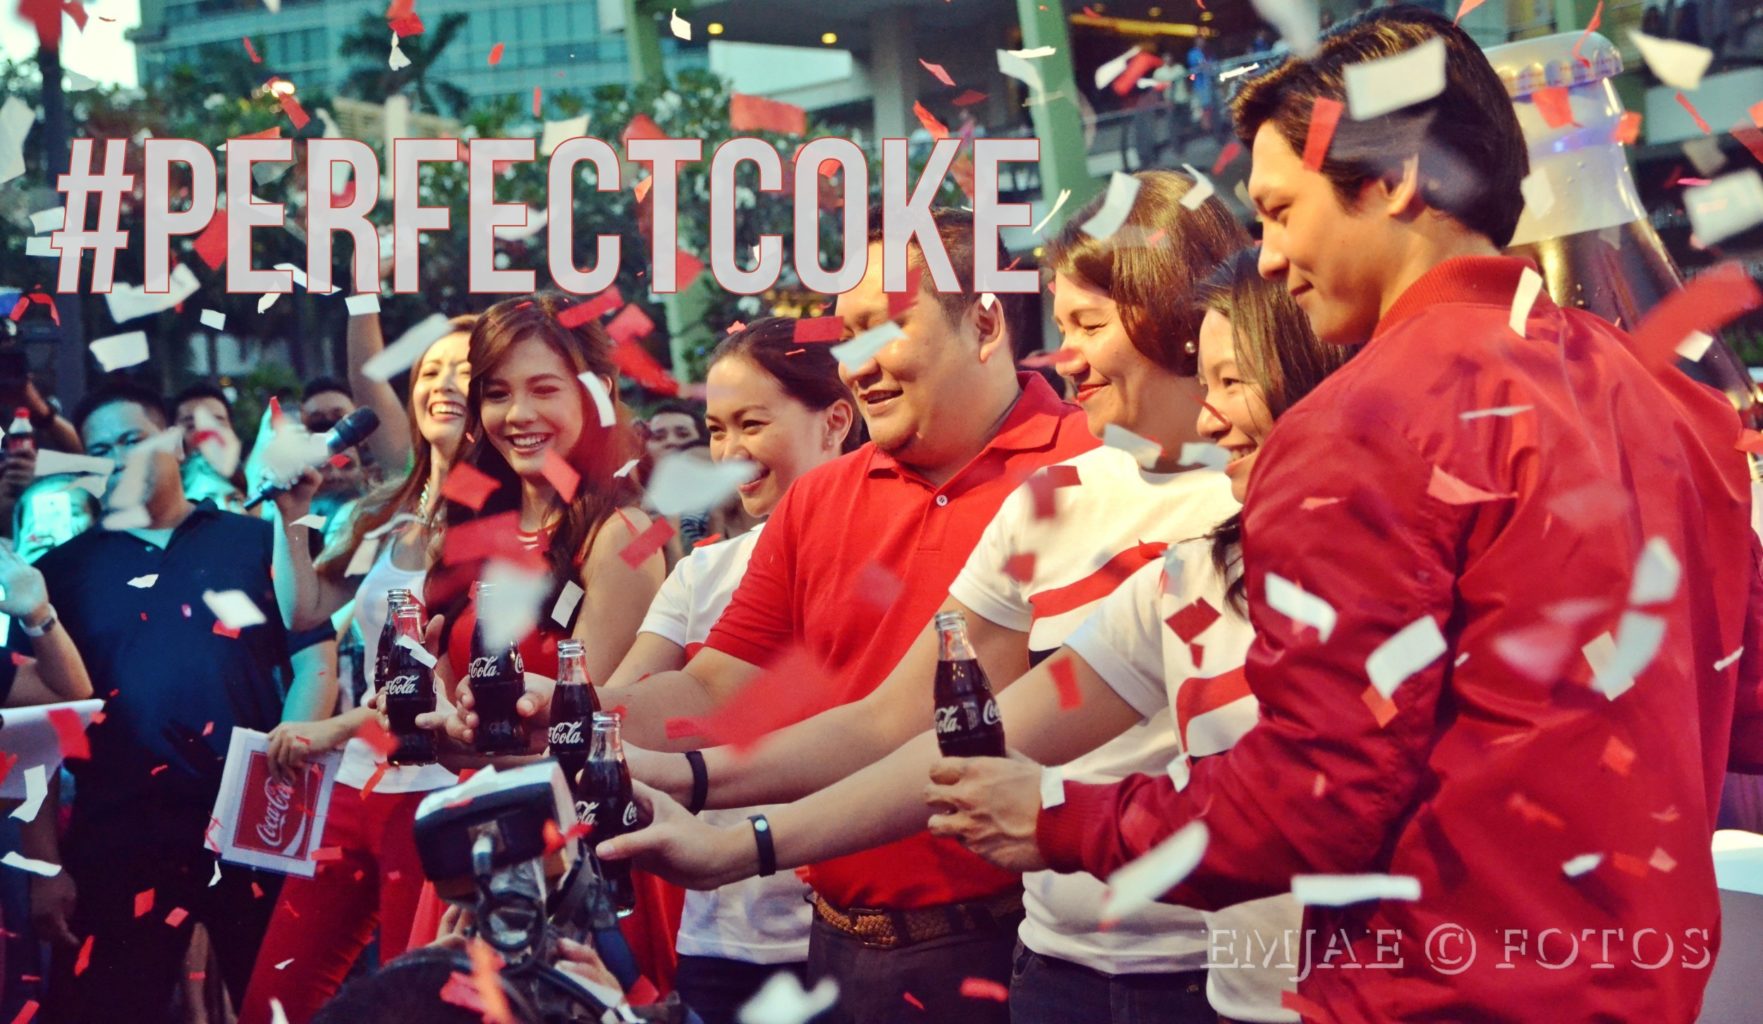 Taste the #PerfectCoke Like It’s Your First with Janella and Joseph